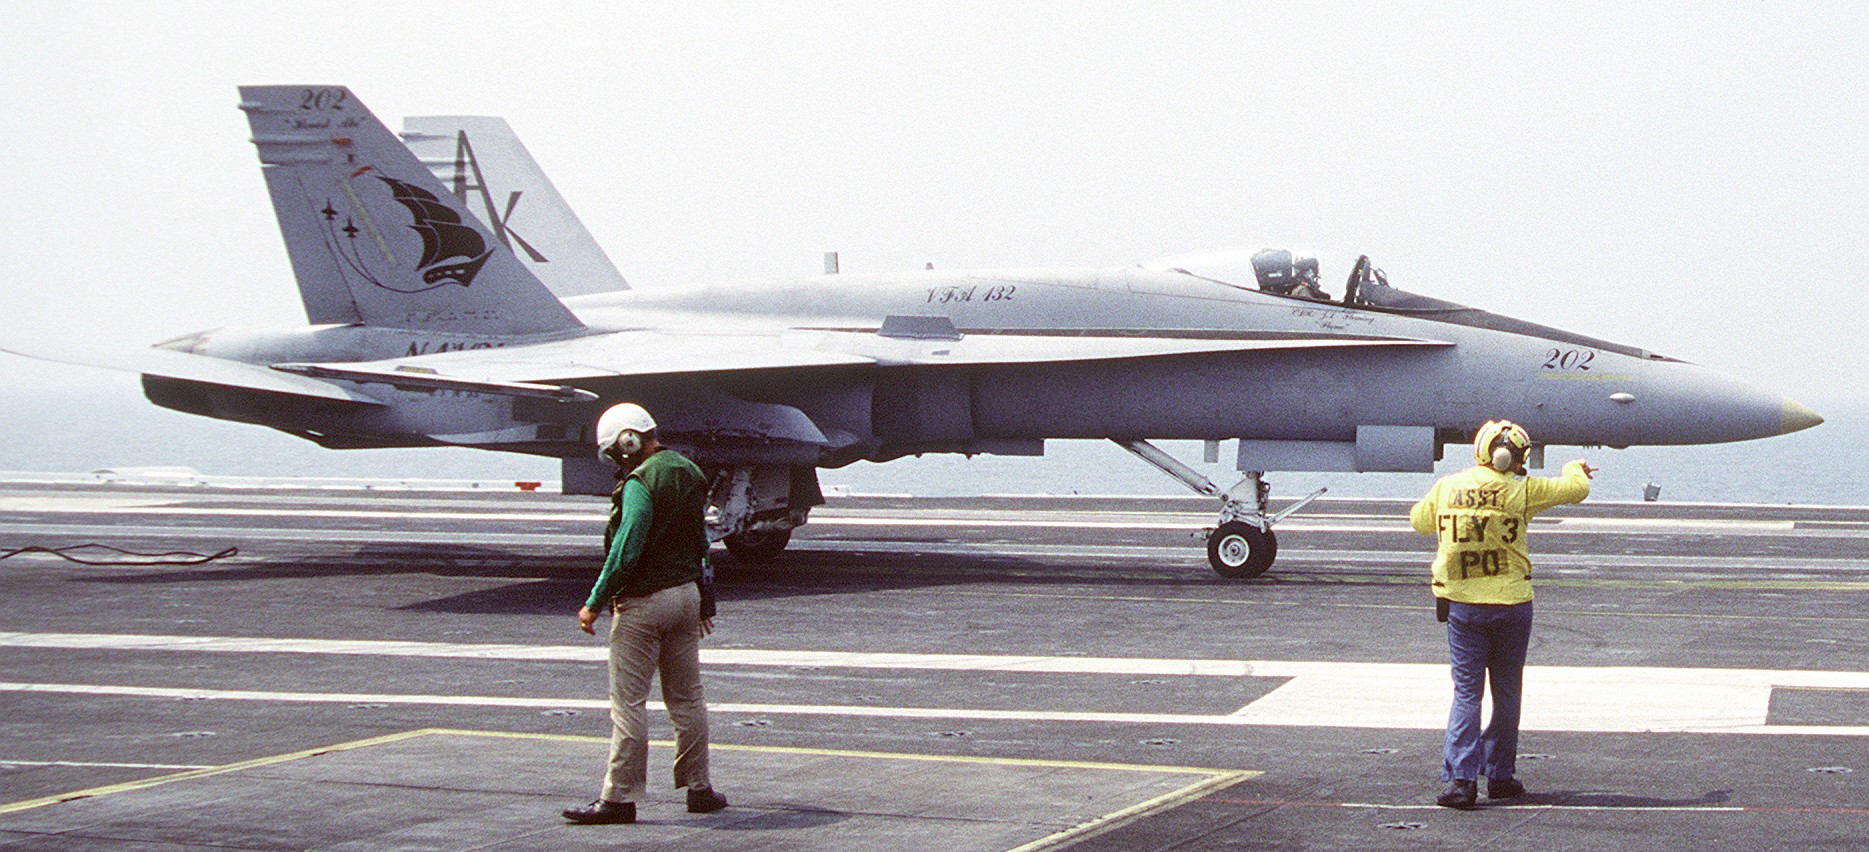 vfa-132 privateers strike fighter squadron f/a-18a hornet cvw-13 uss abraham lincoln cvn-72 1990 26